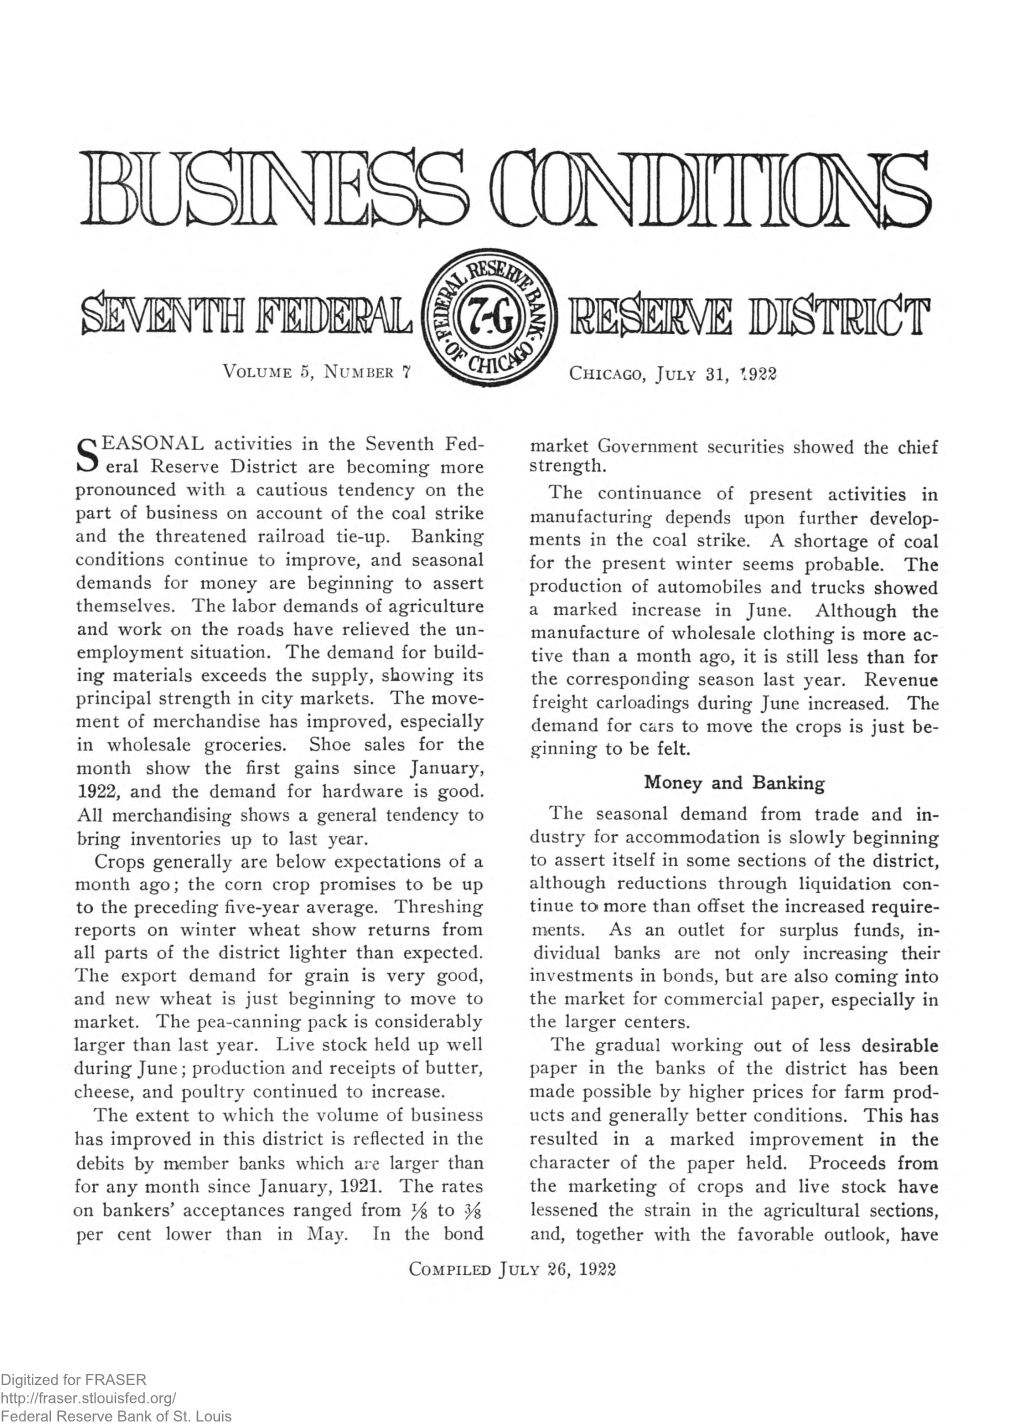 Business Conditions: July 31, 1922, Volume 5, Number 7